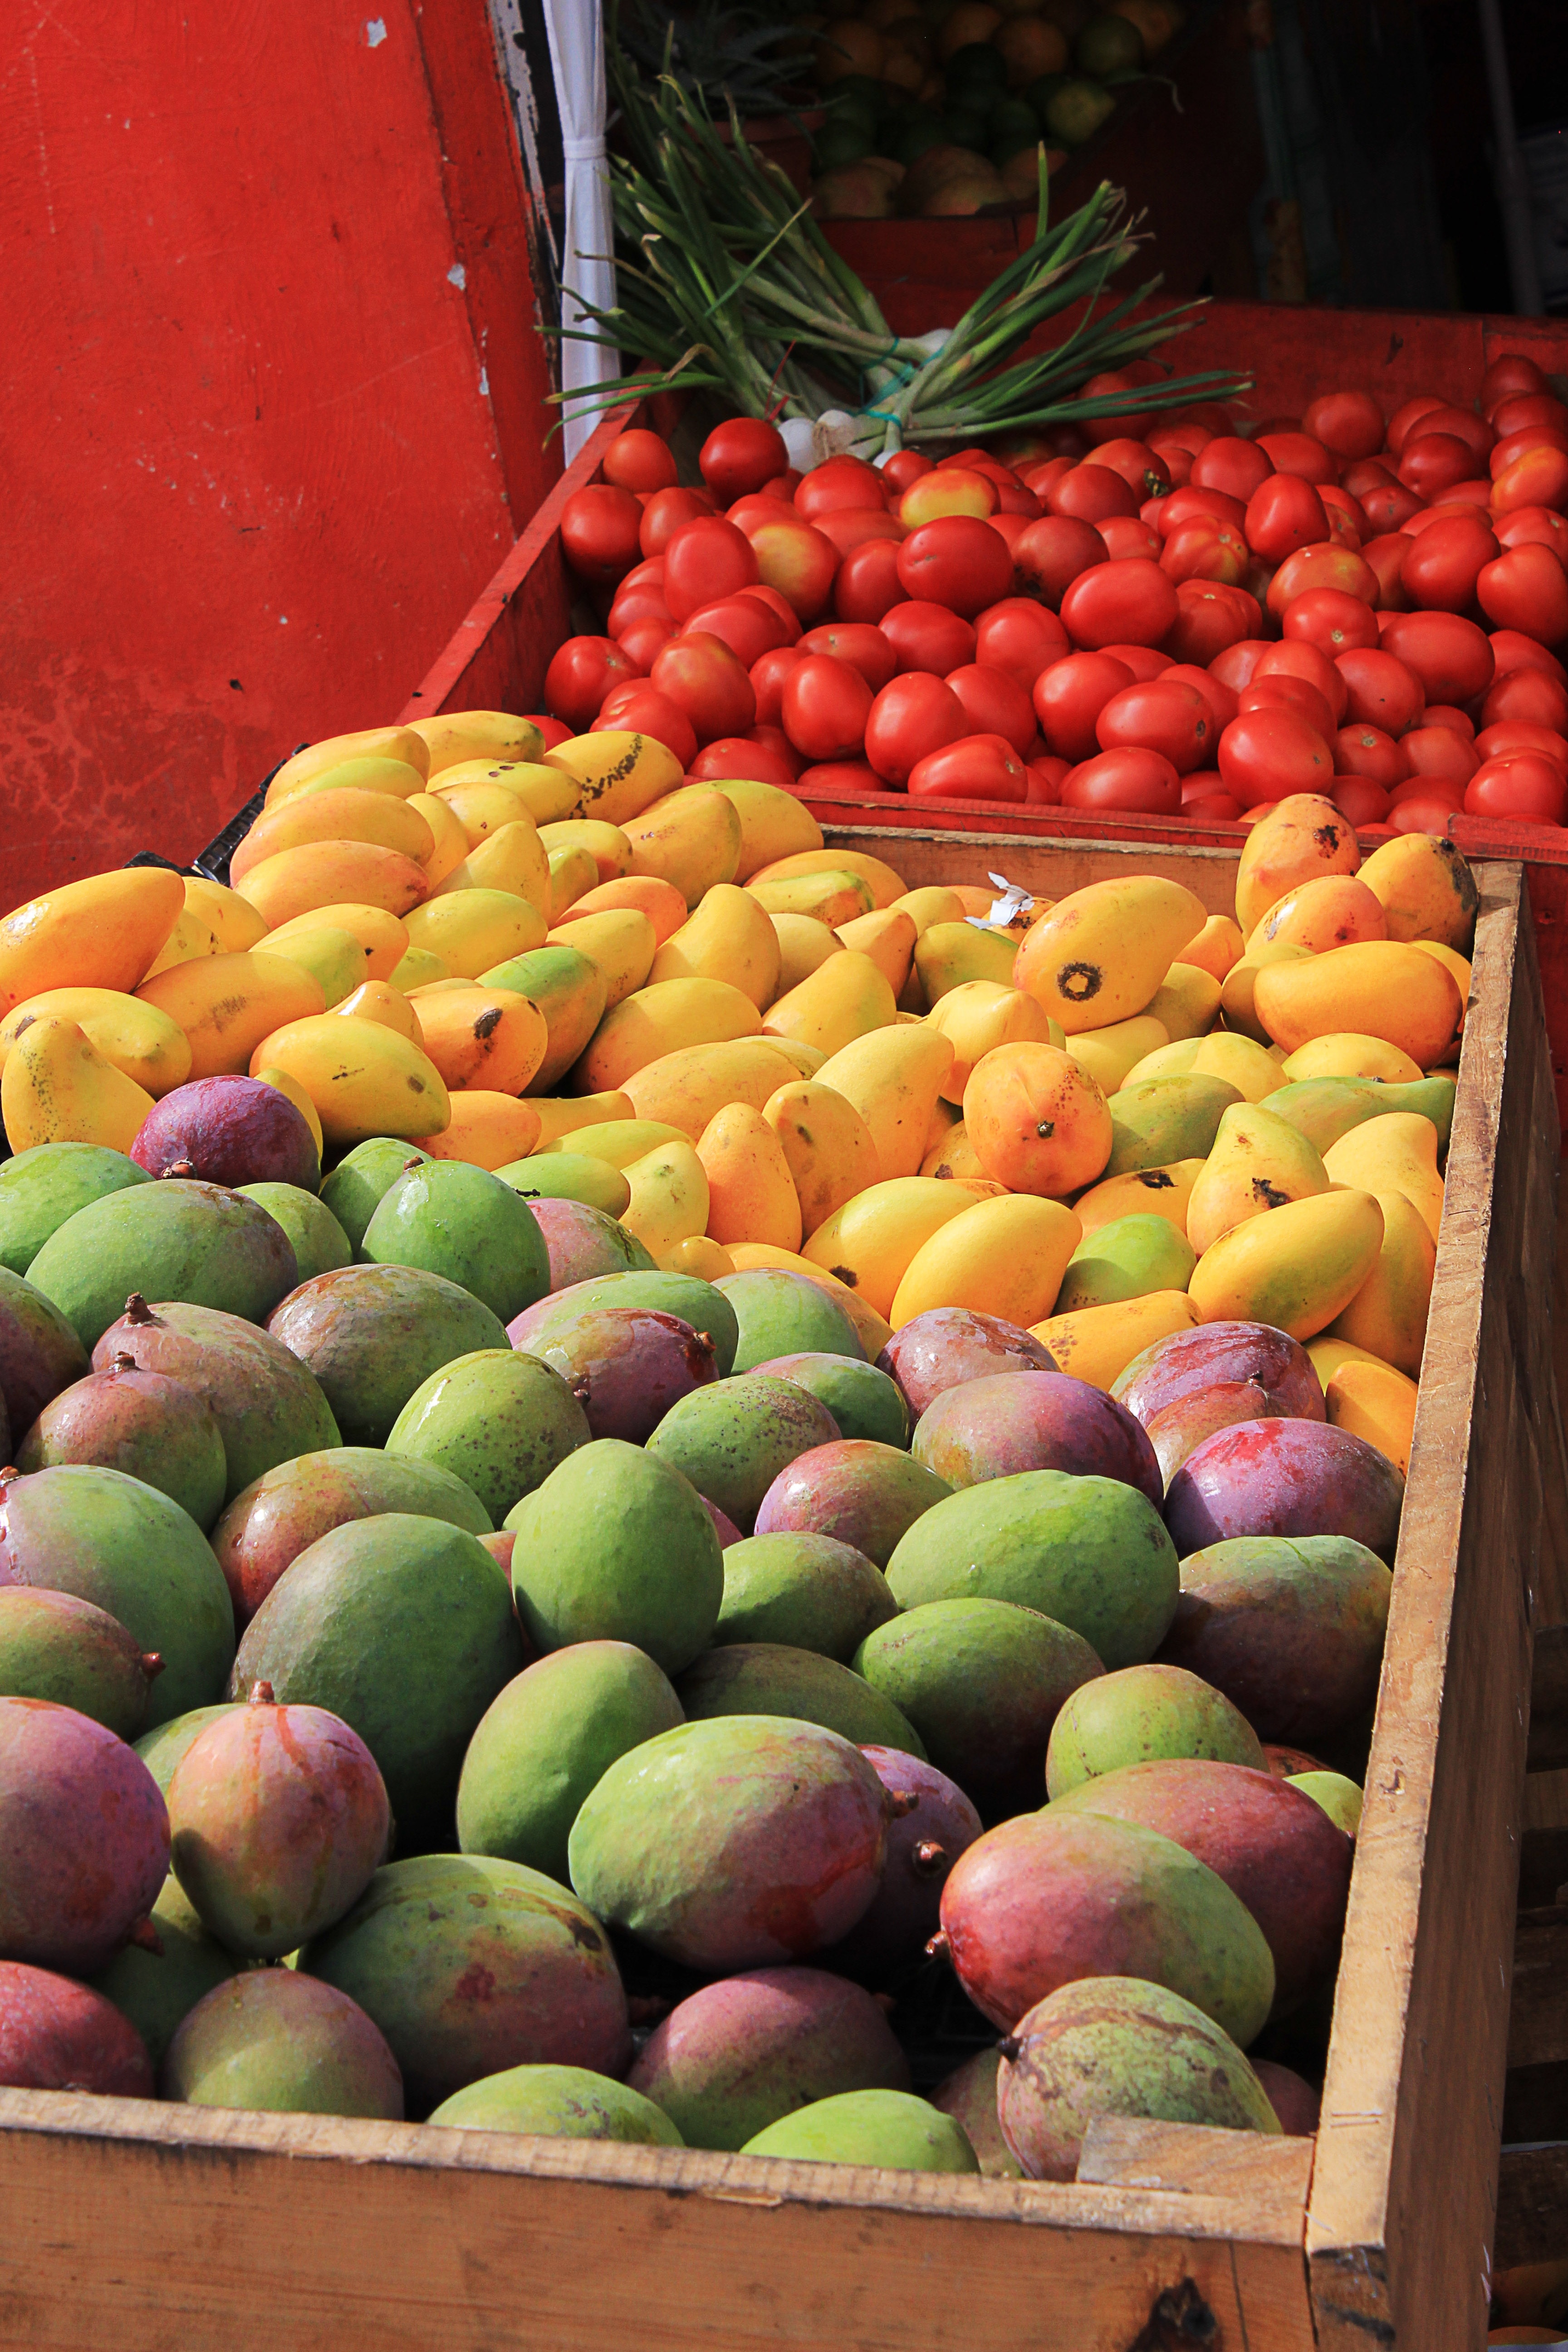 Download Red Yellow And Green Mangoes On Wooden Crates Free Image Peakpx PSD Mockup Templates